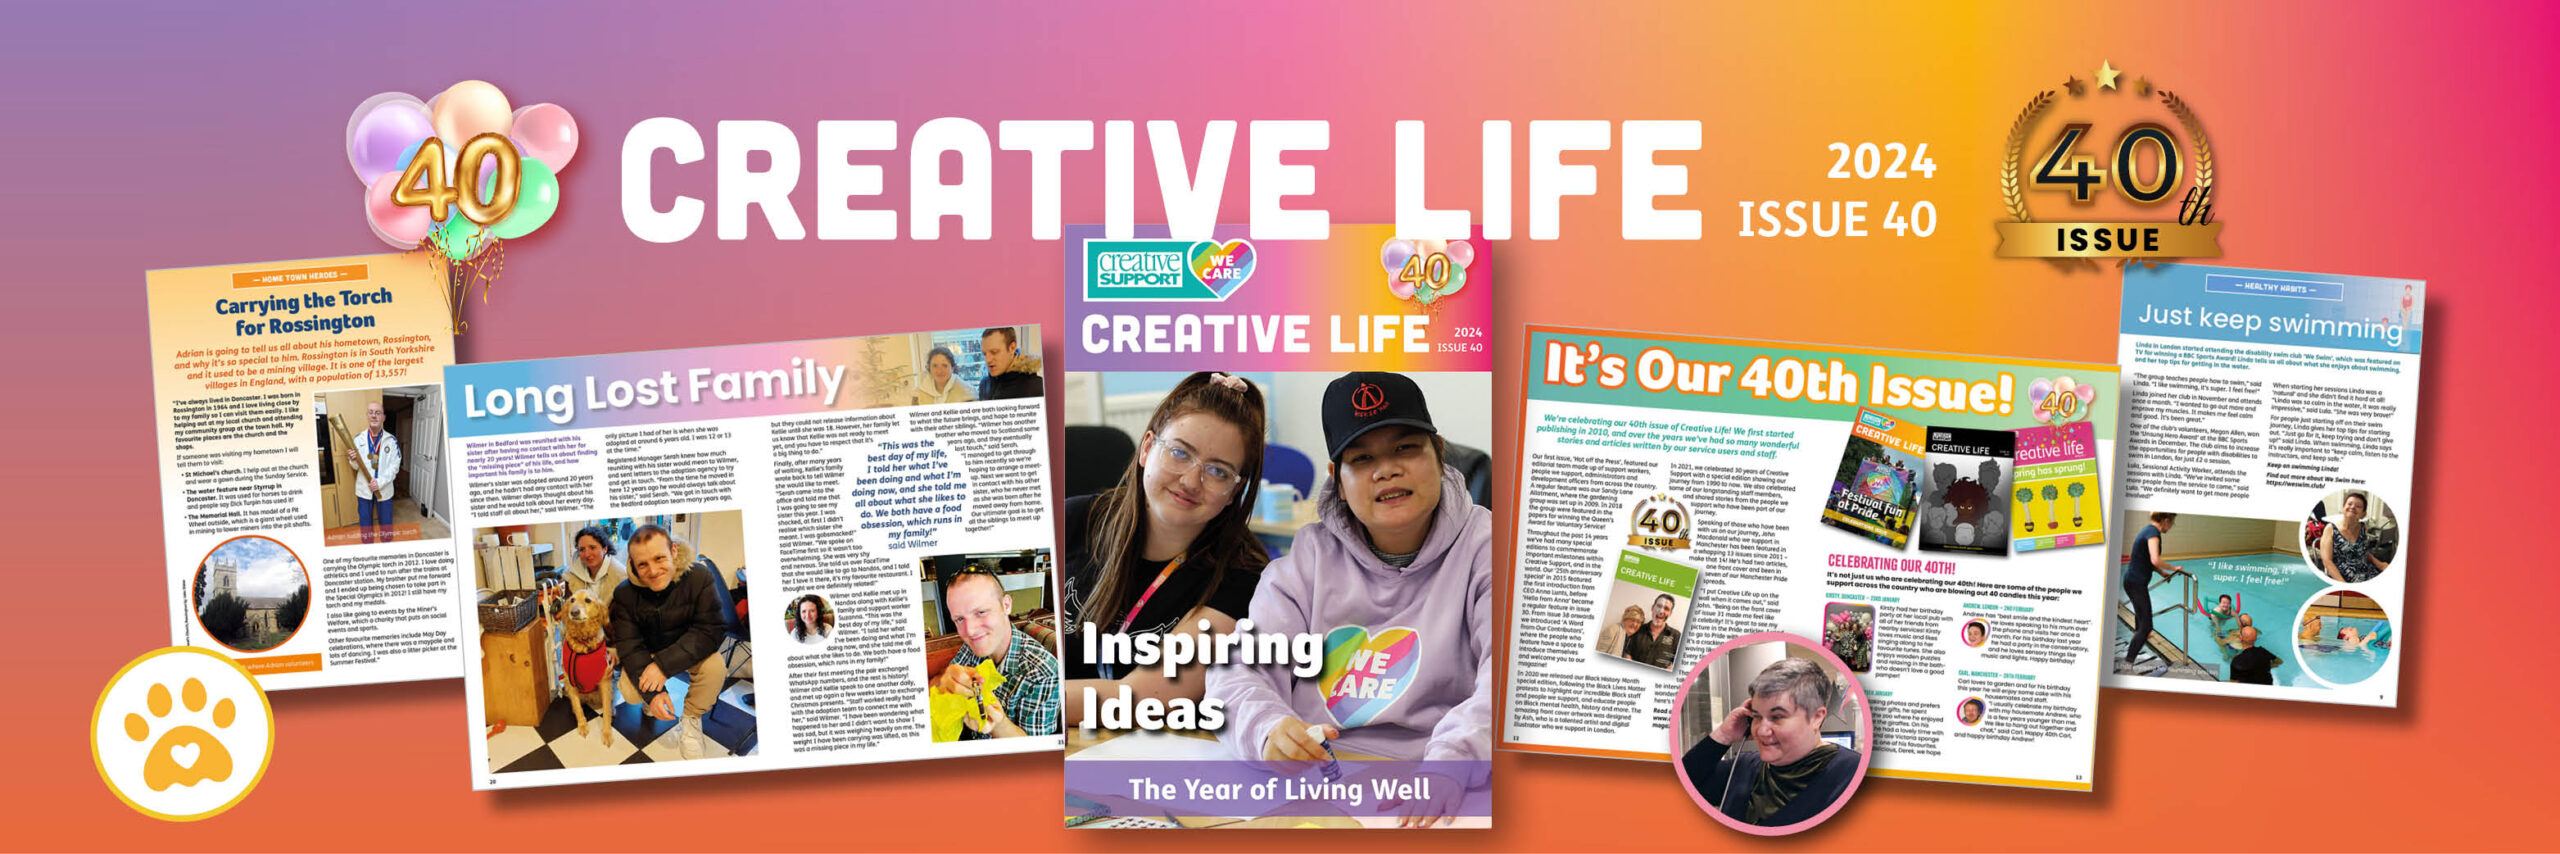 Creative Life #40 – Out Now!